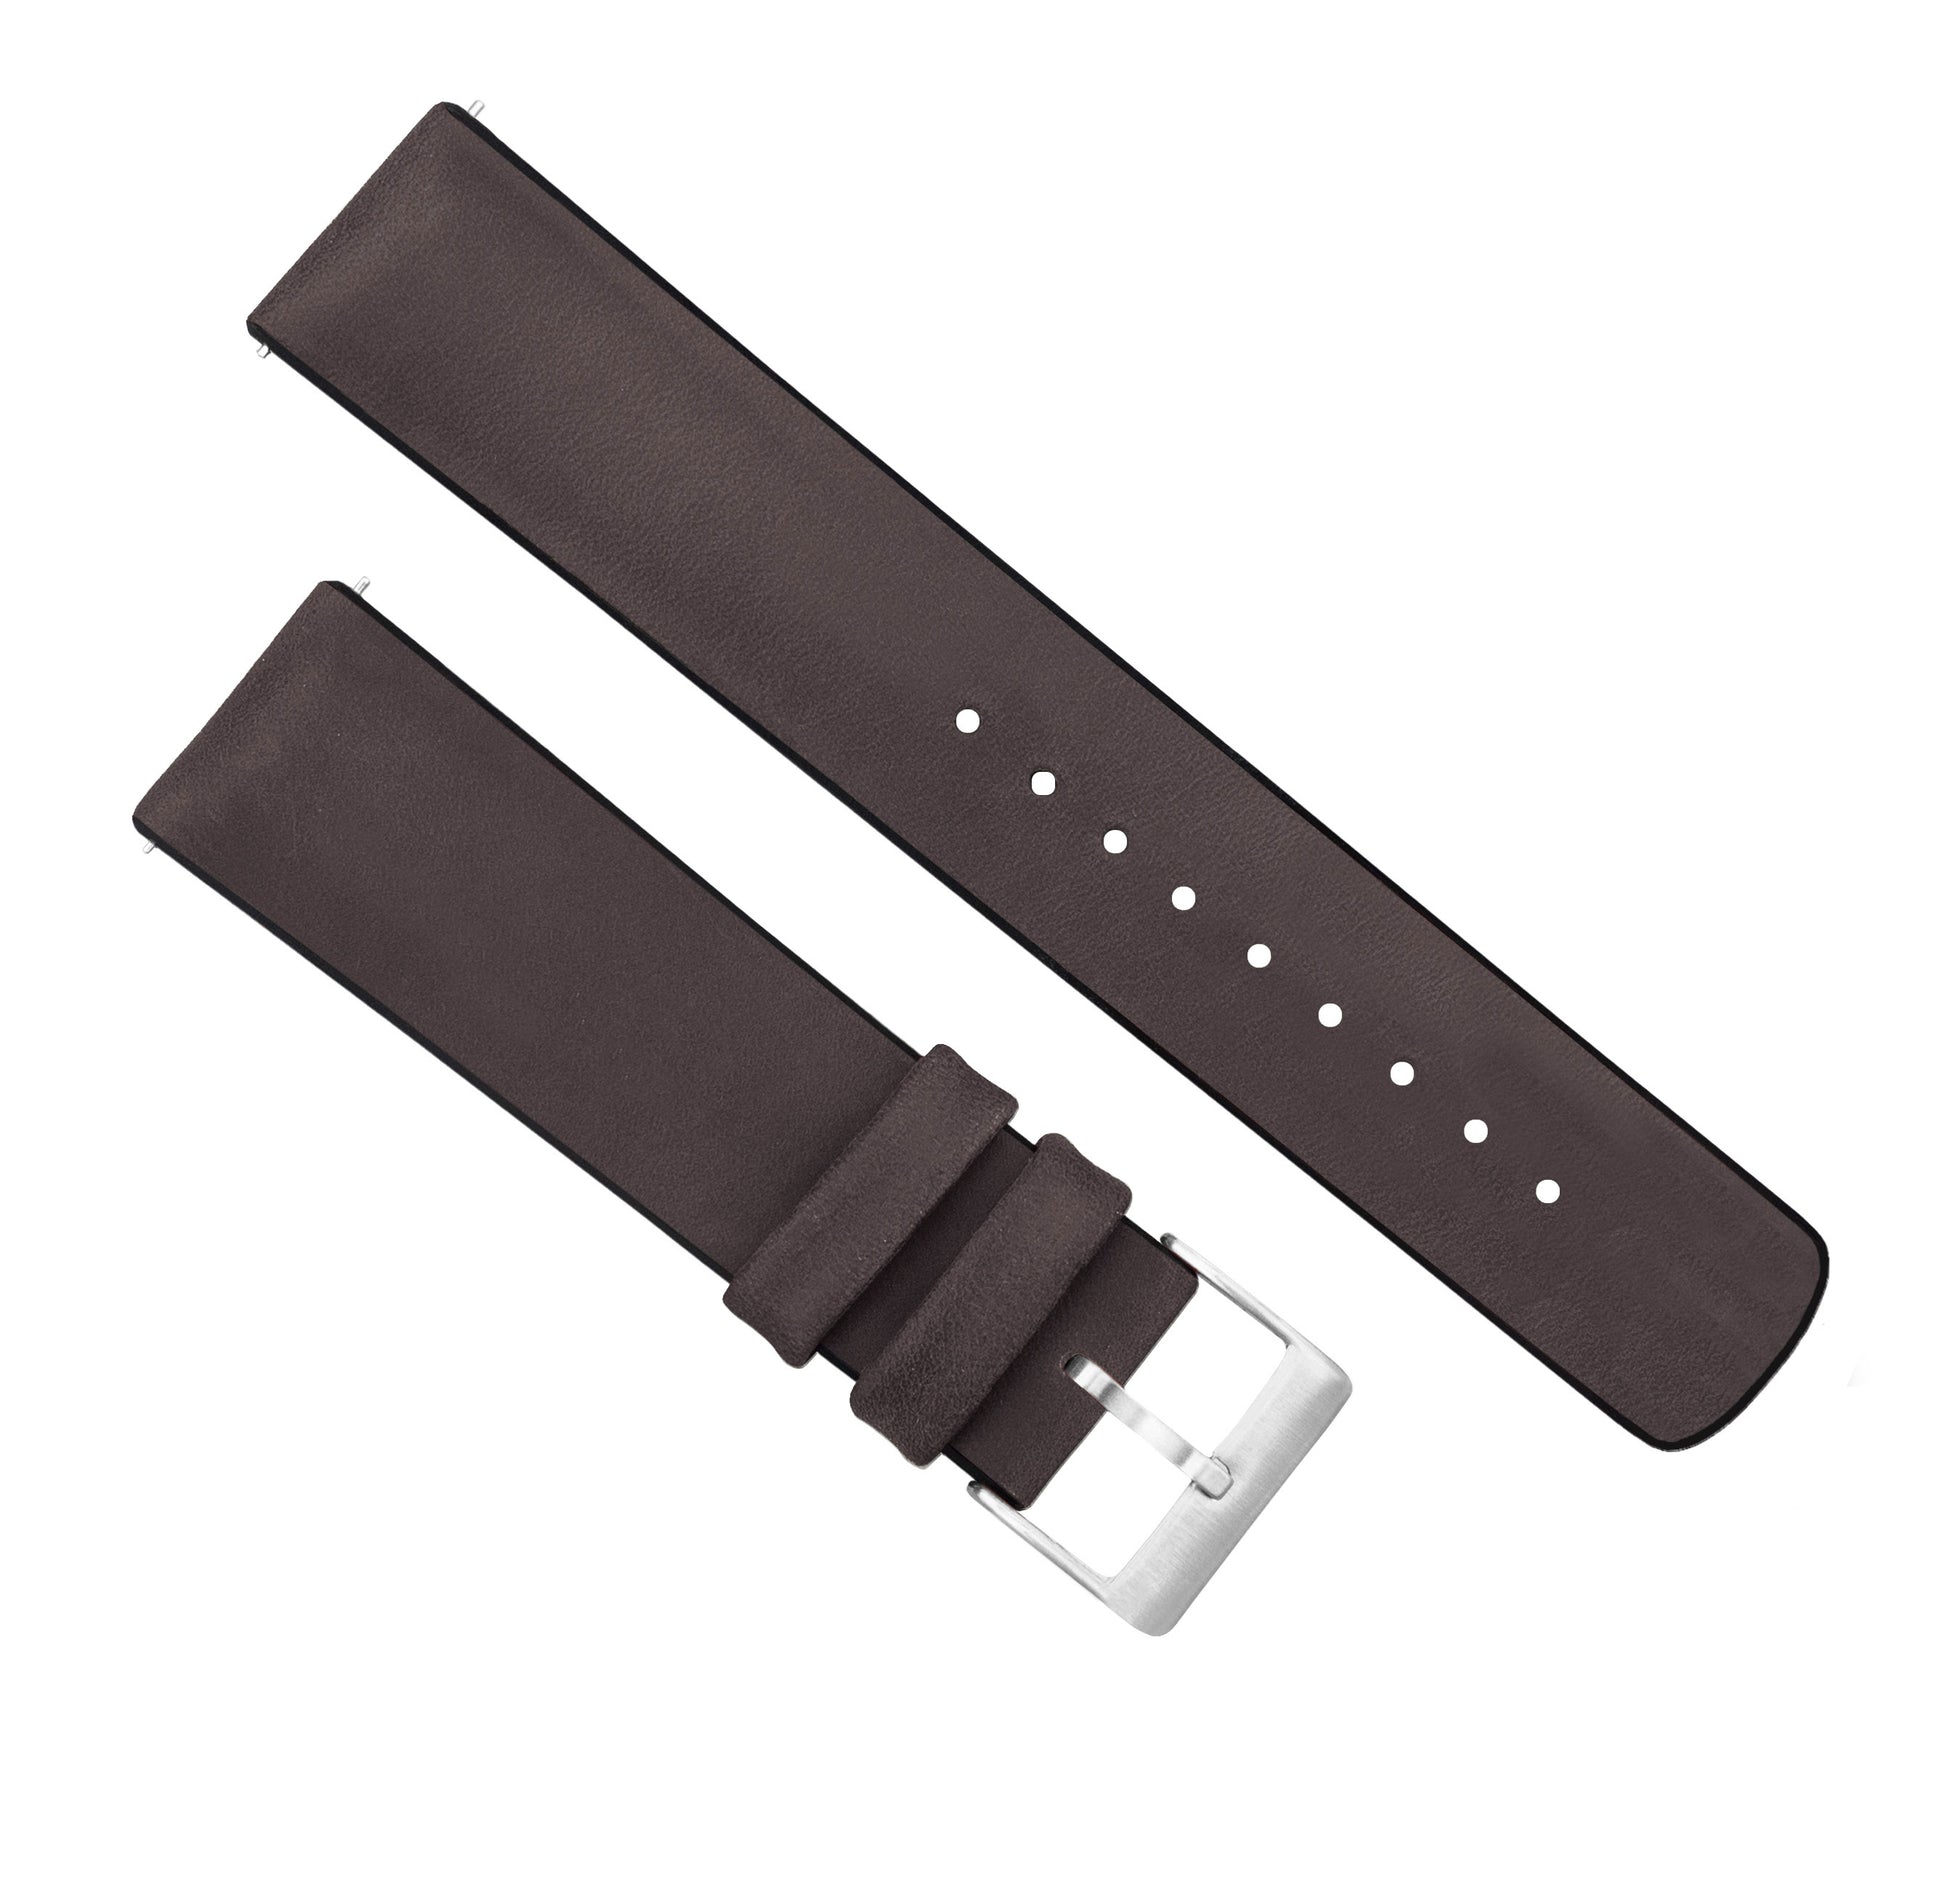 Samsung Galaxy Watch4 | Leather and Rubber Hybrid | Smoke Brown - Barton Watch Bands